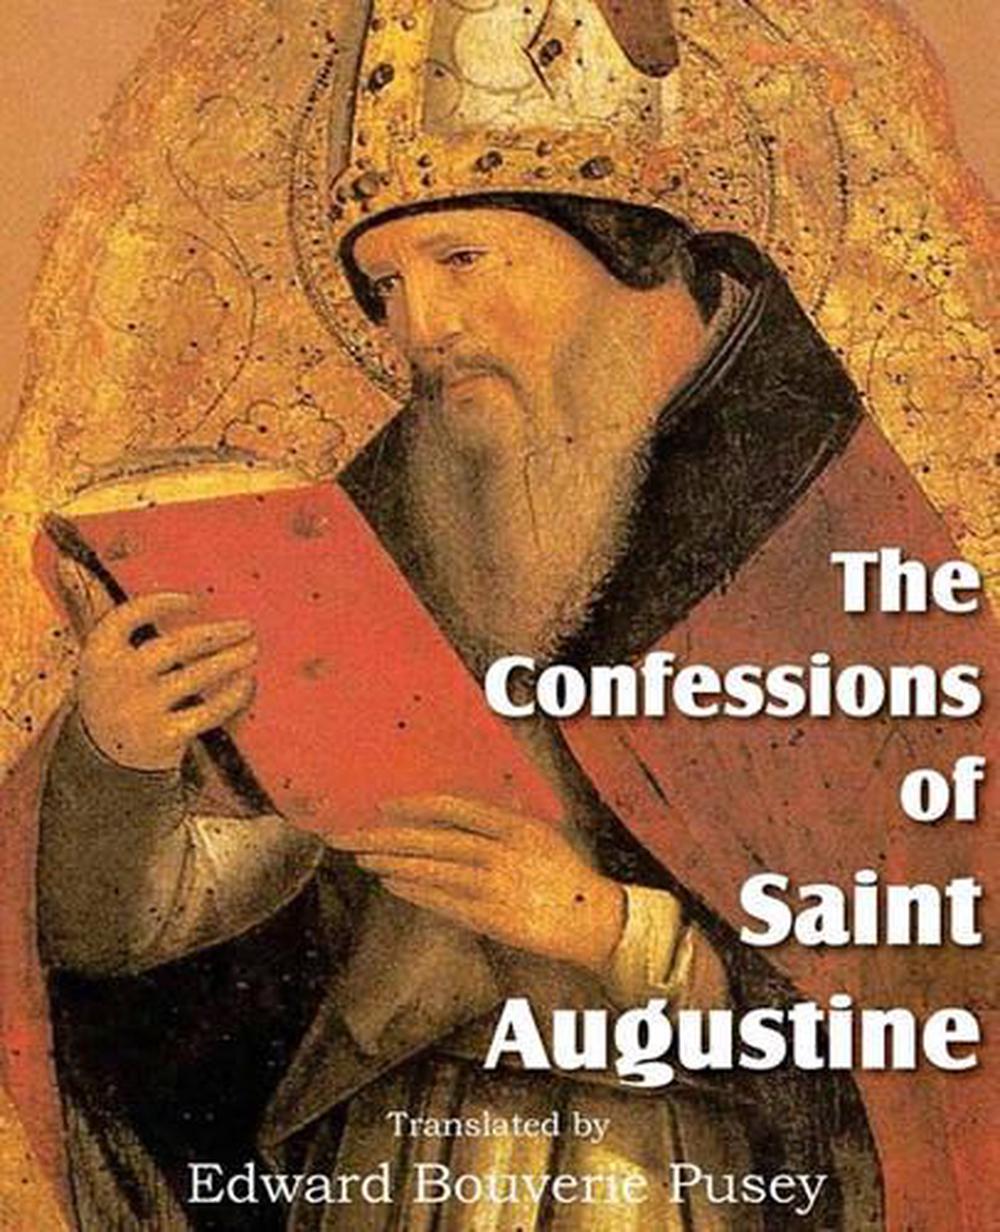 The Seven Deadly Sins In The Confessions By Saint Augustine